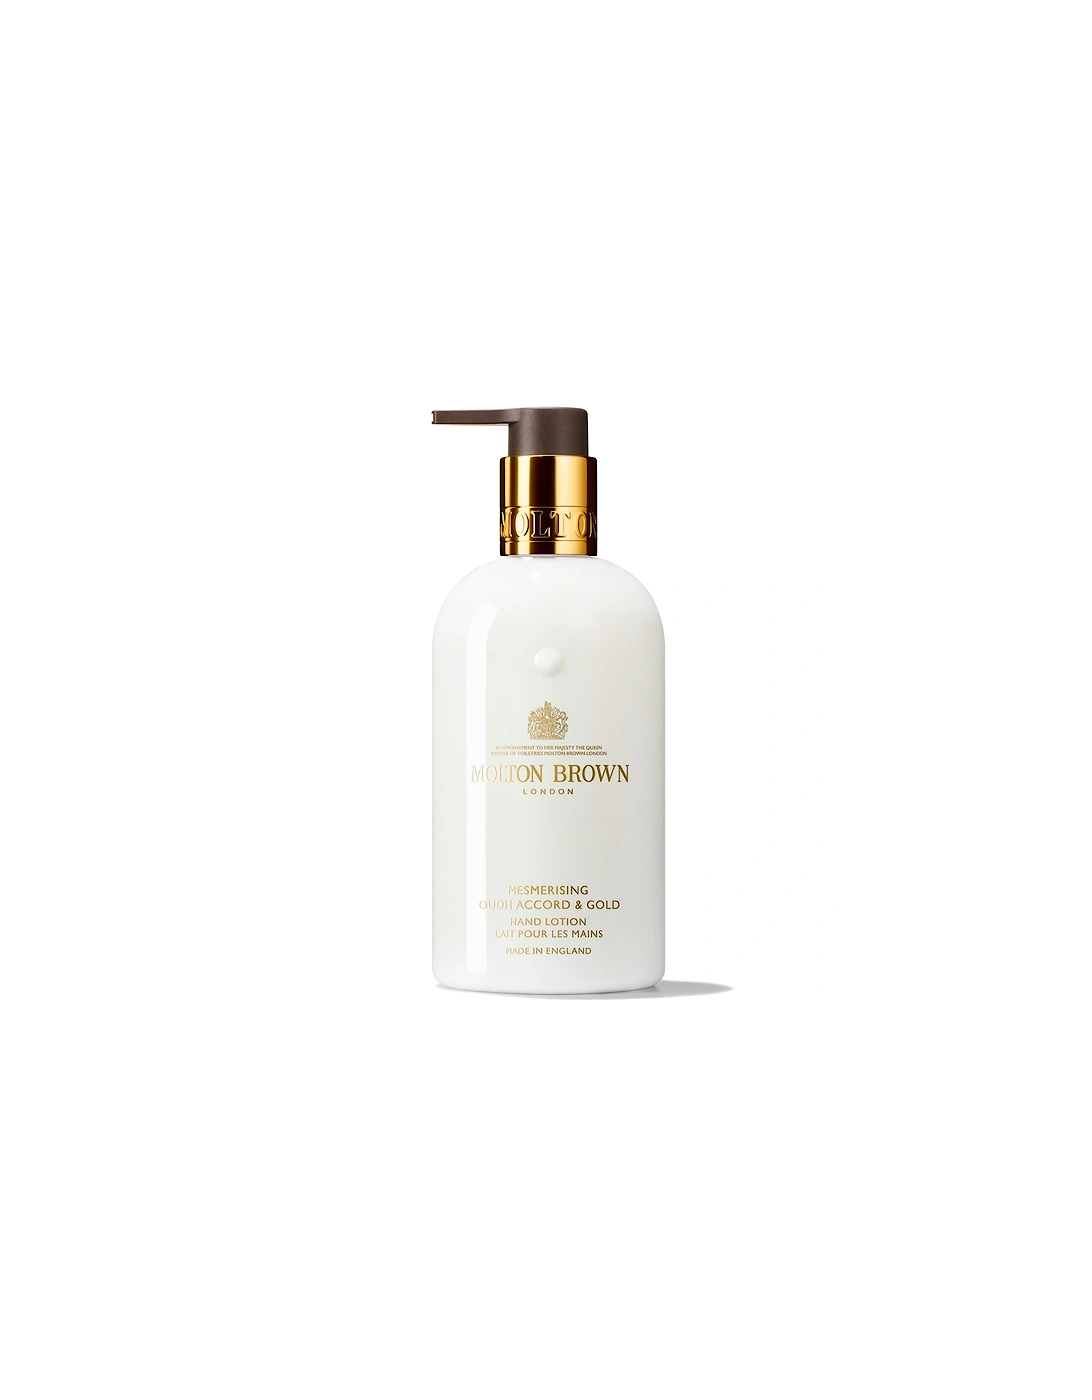 Mesmerising Oudh Accord and Gold Hand Lotion 300ml, 2 of 1